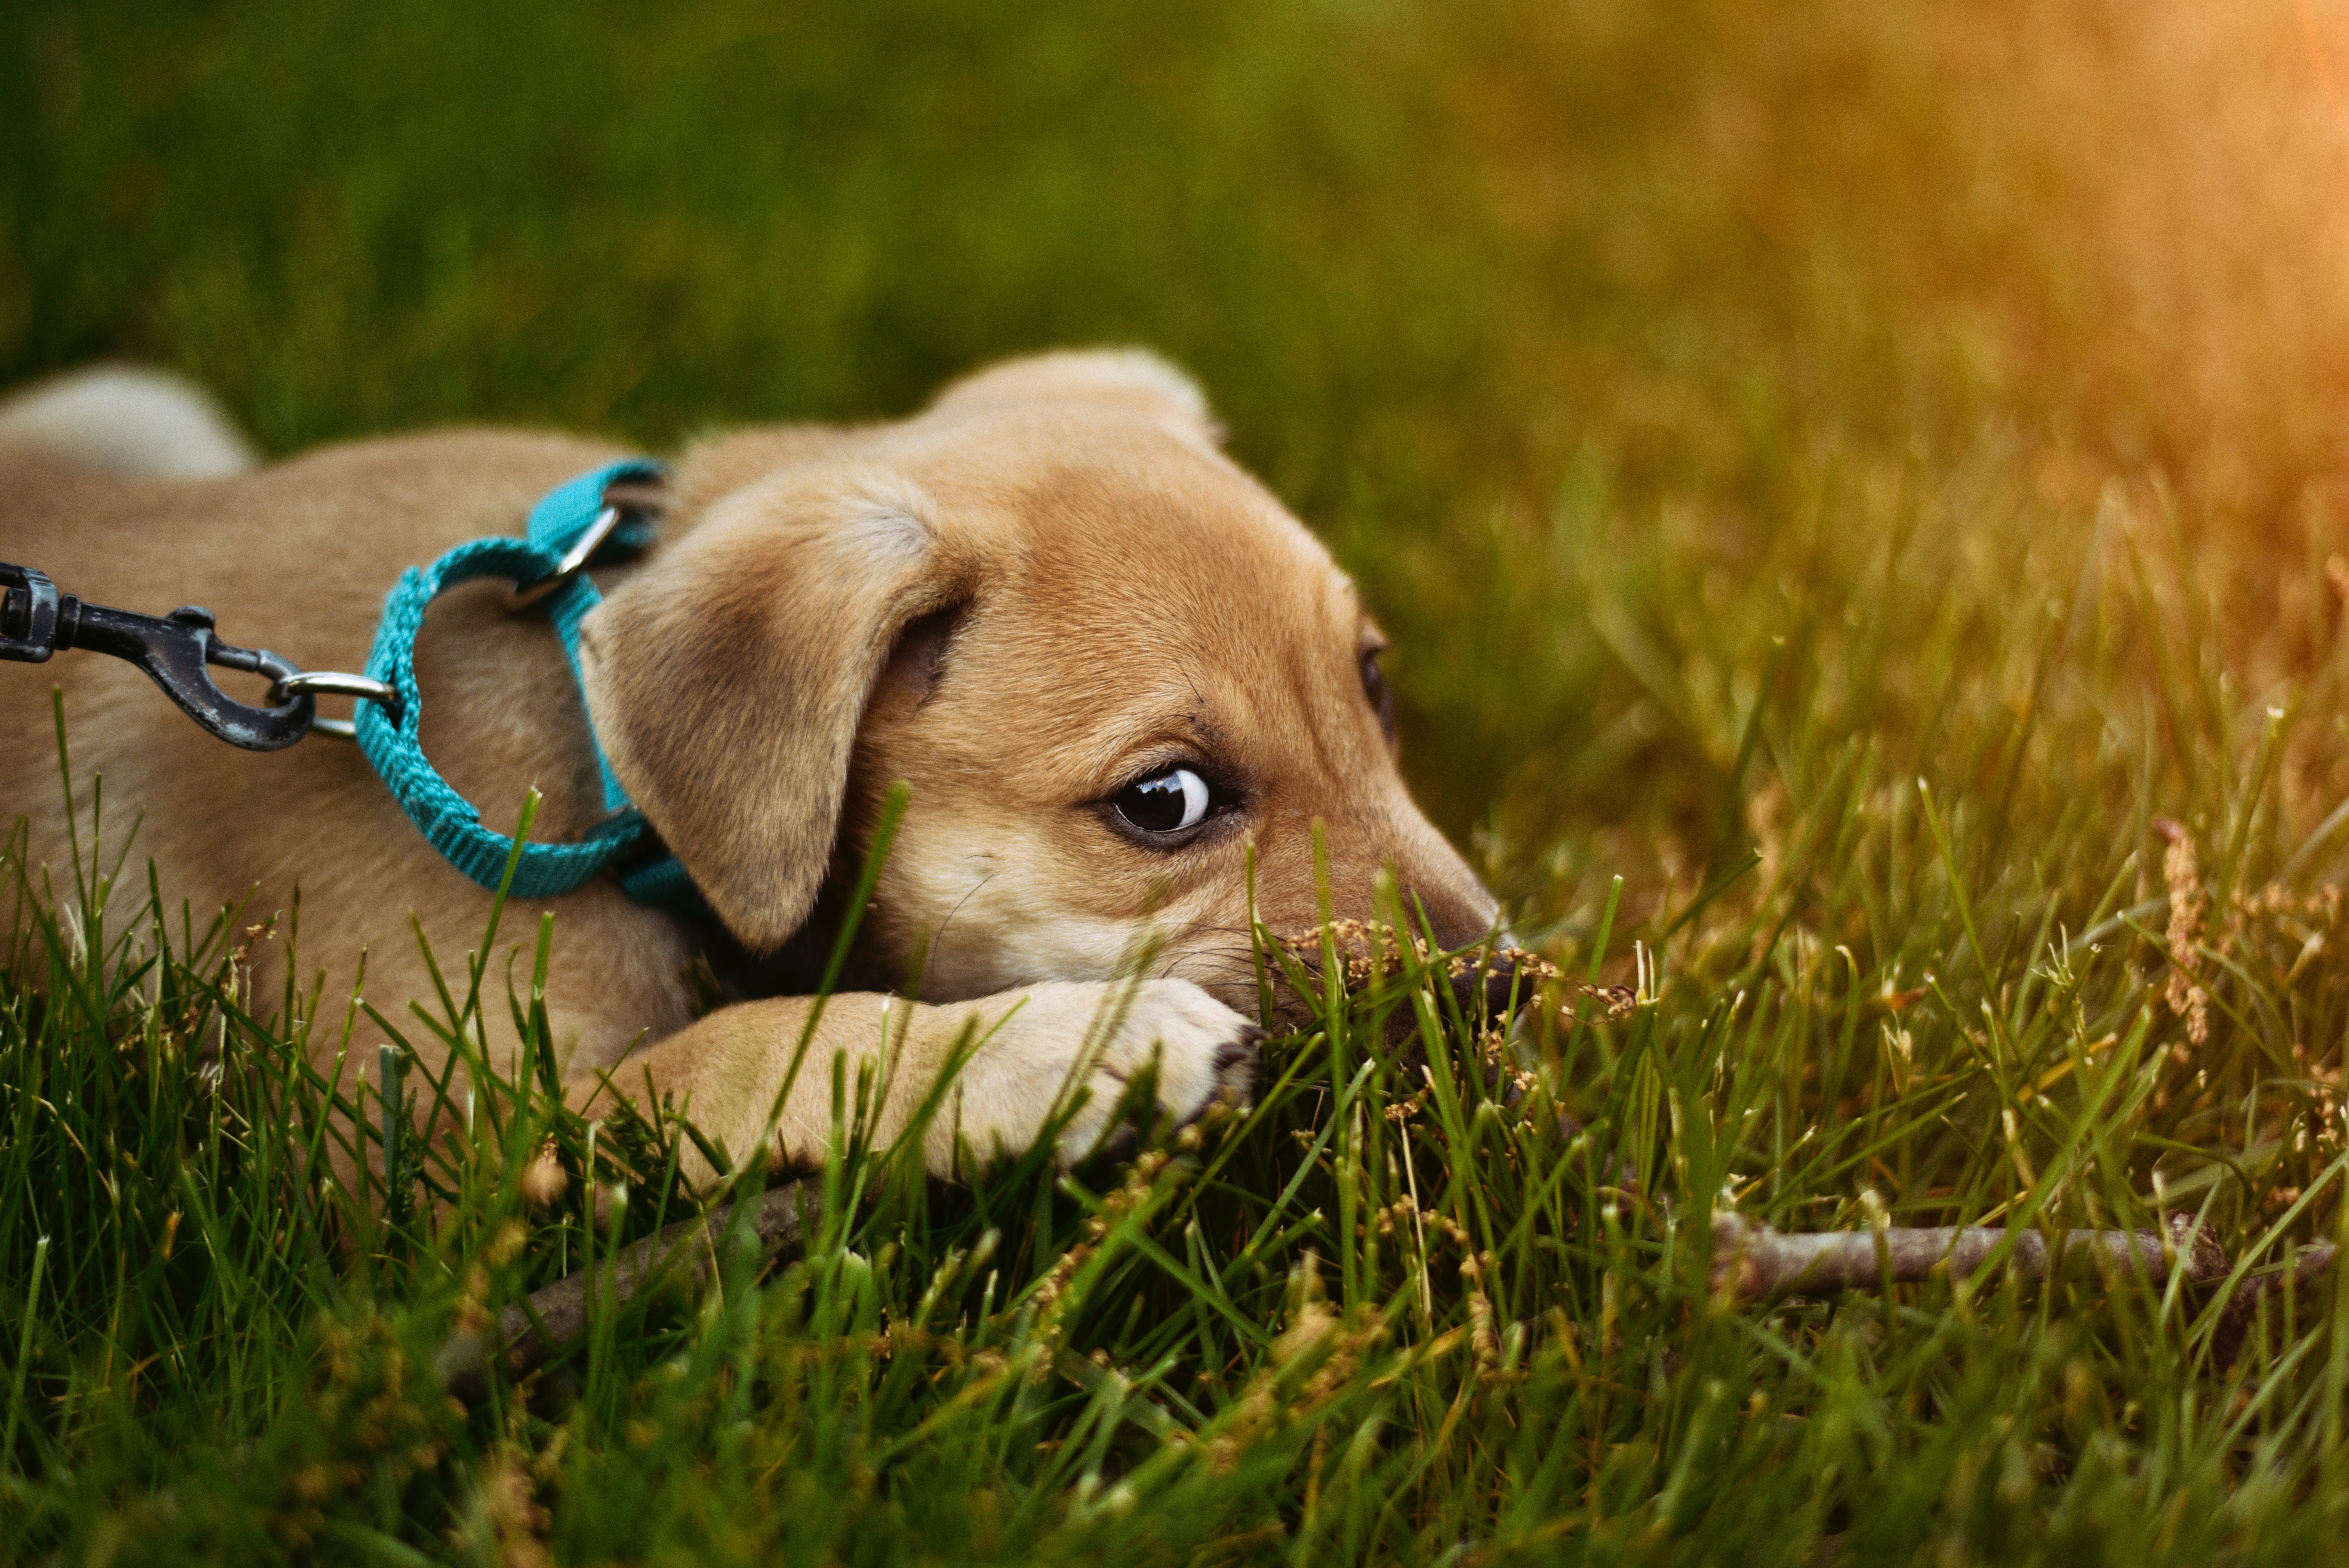 Scared puppy with harness and leash on laying down in grass